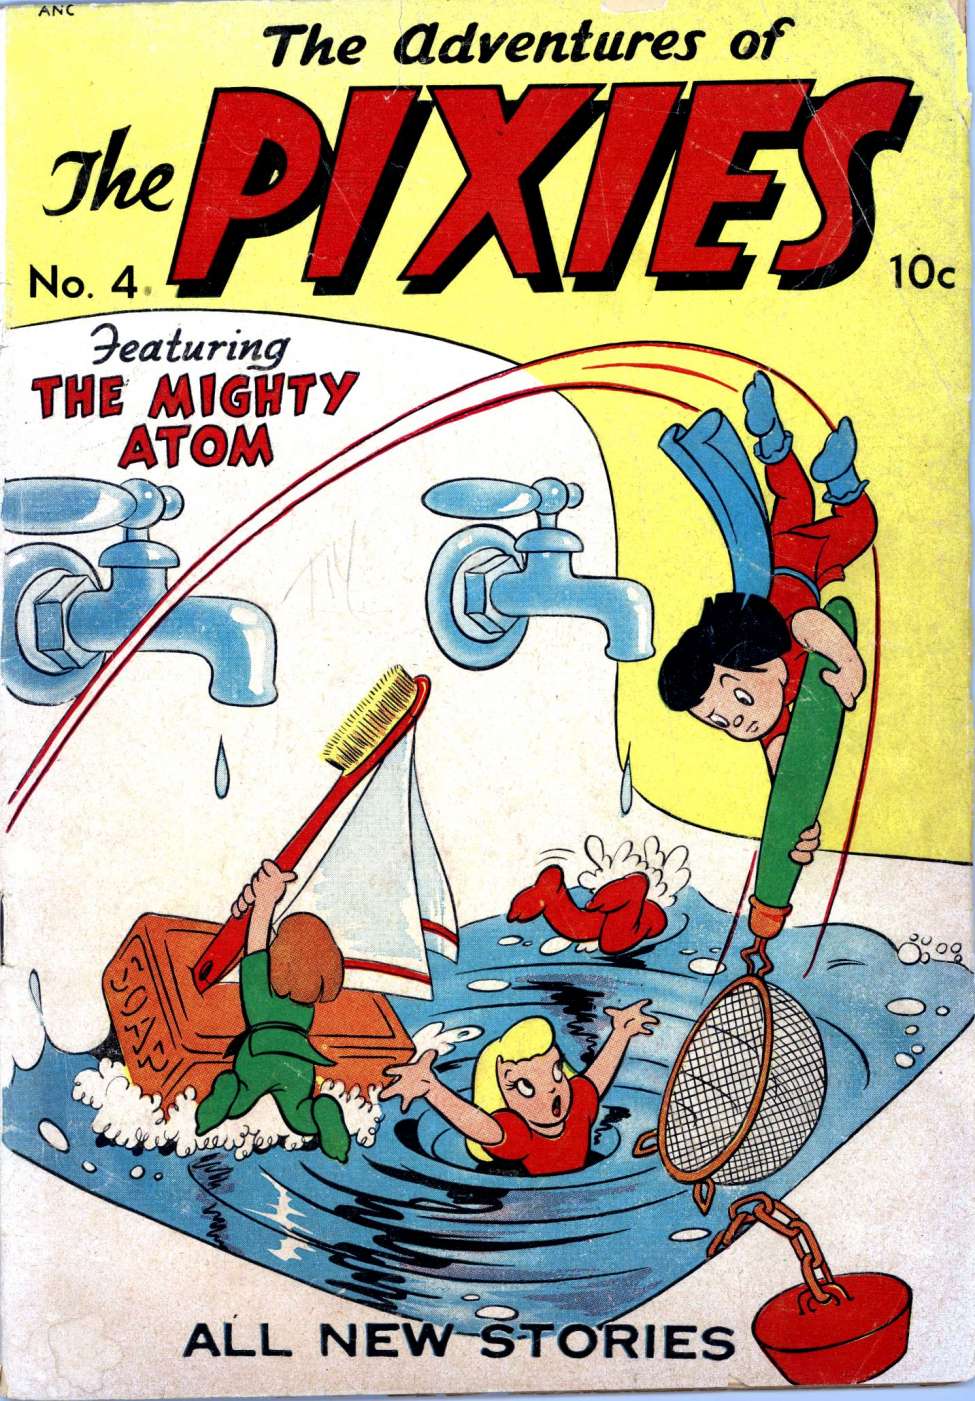 Book Cover For The Pixies 4